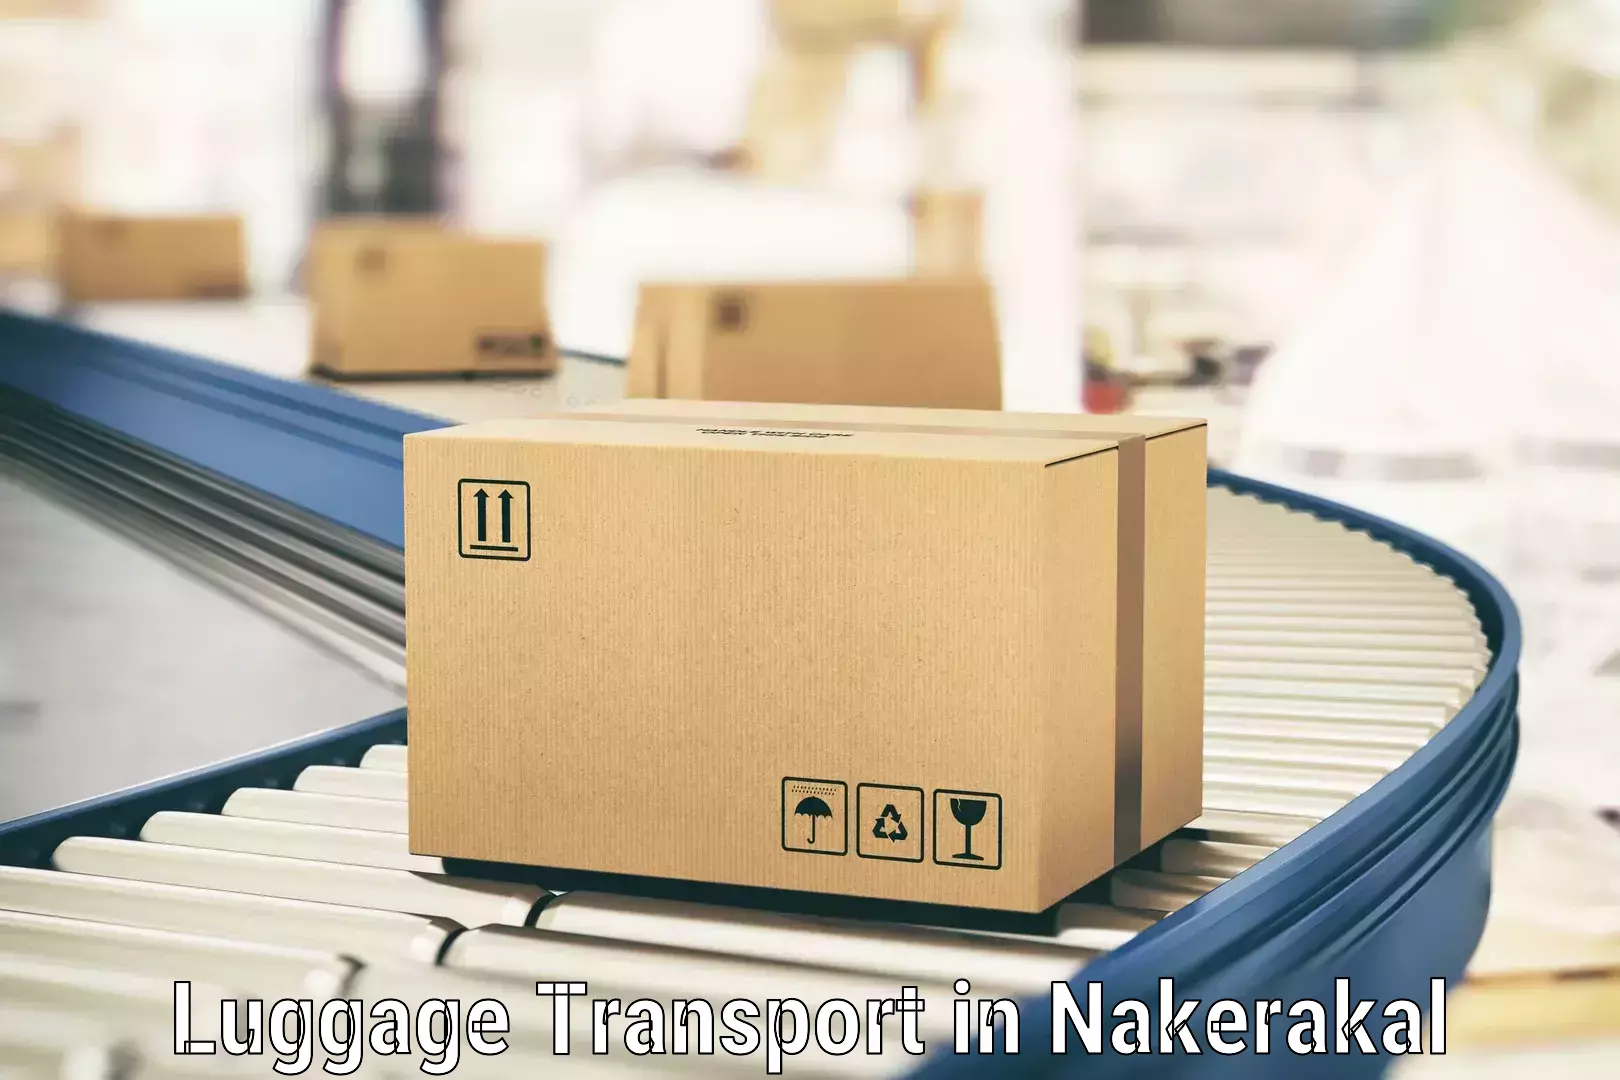 Baggage delivery scheduling in Nakerakal